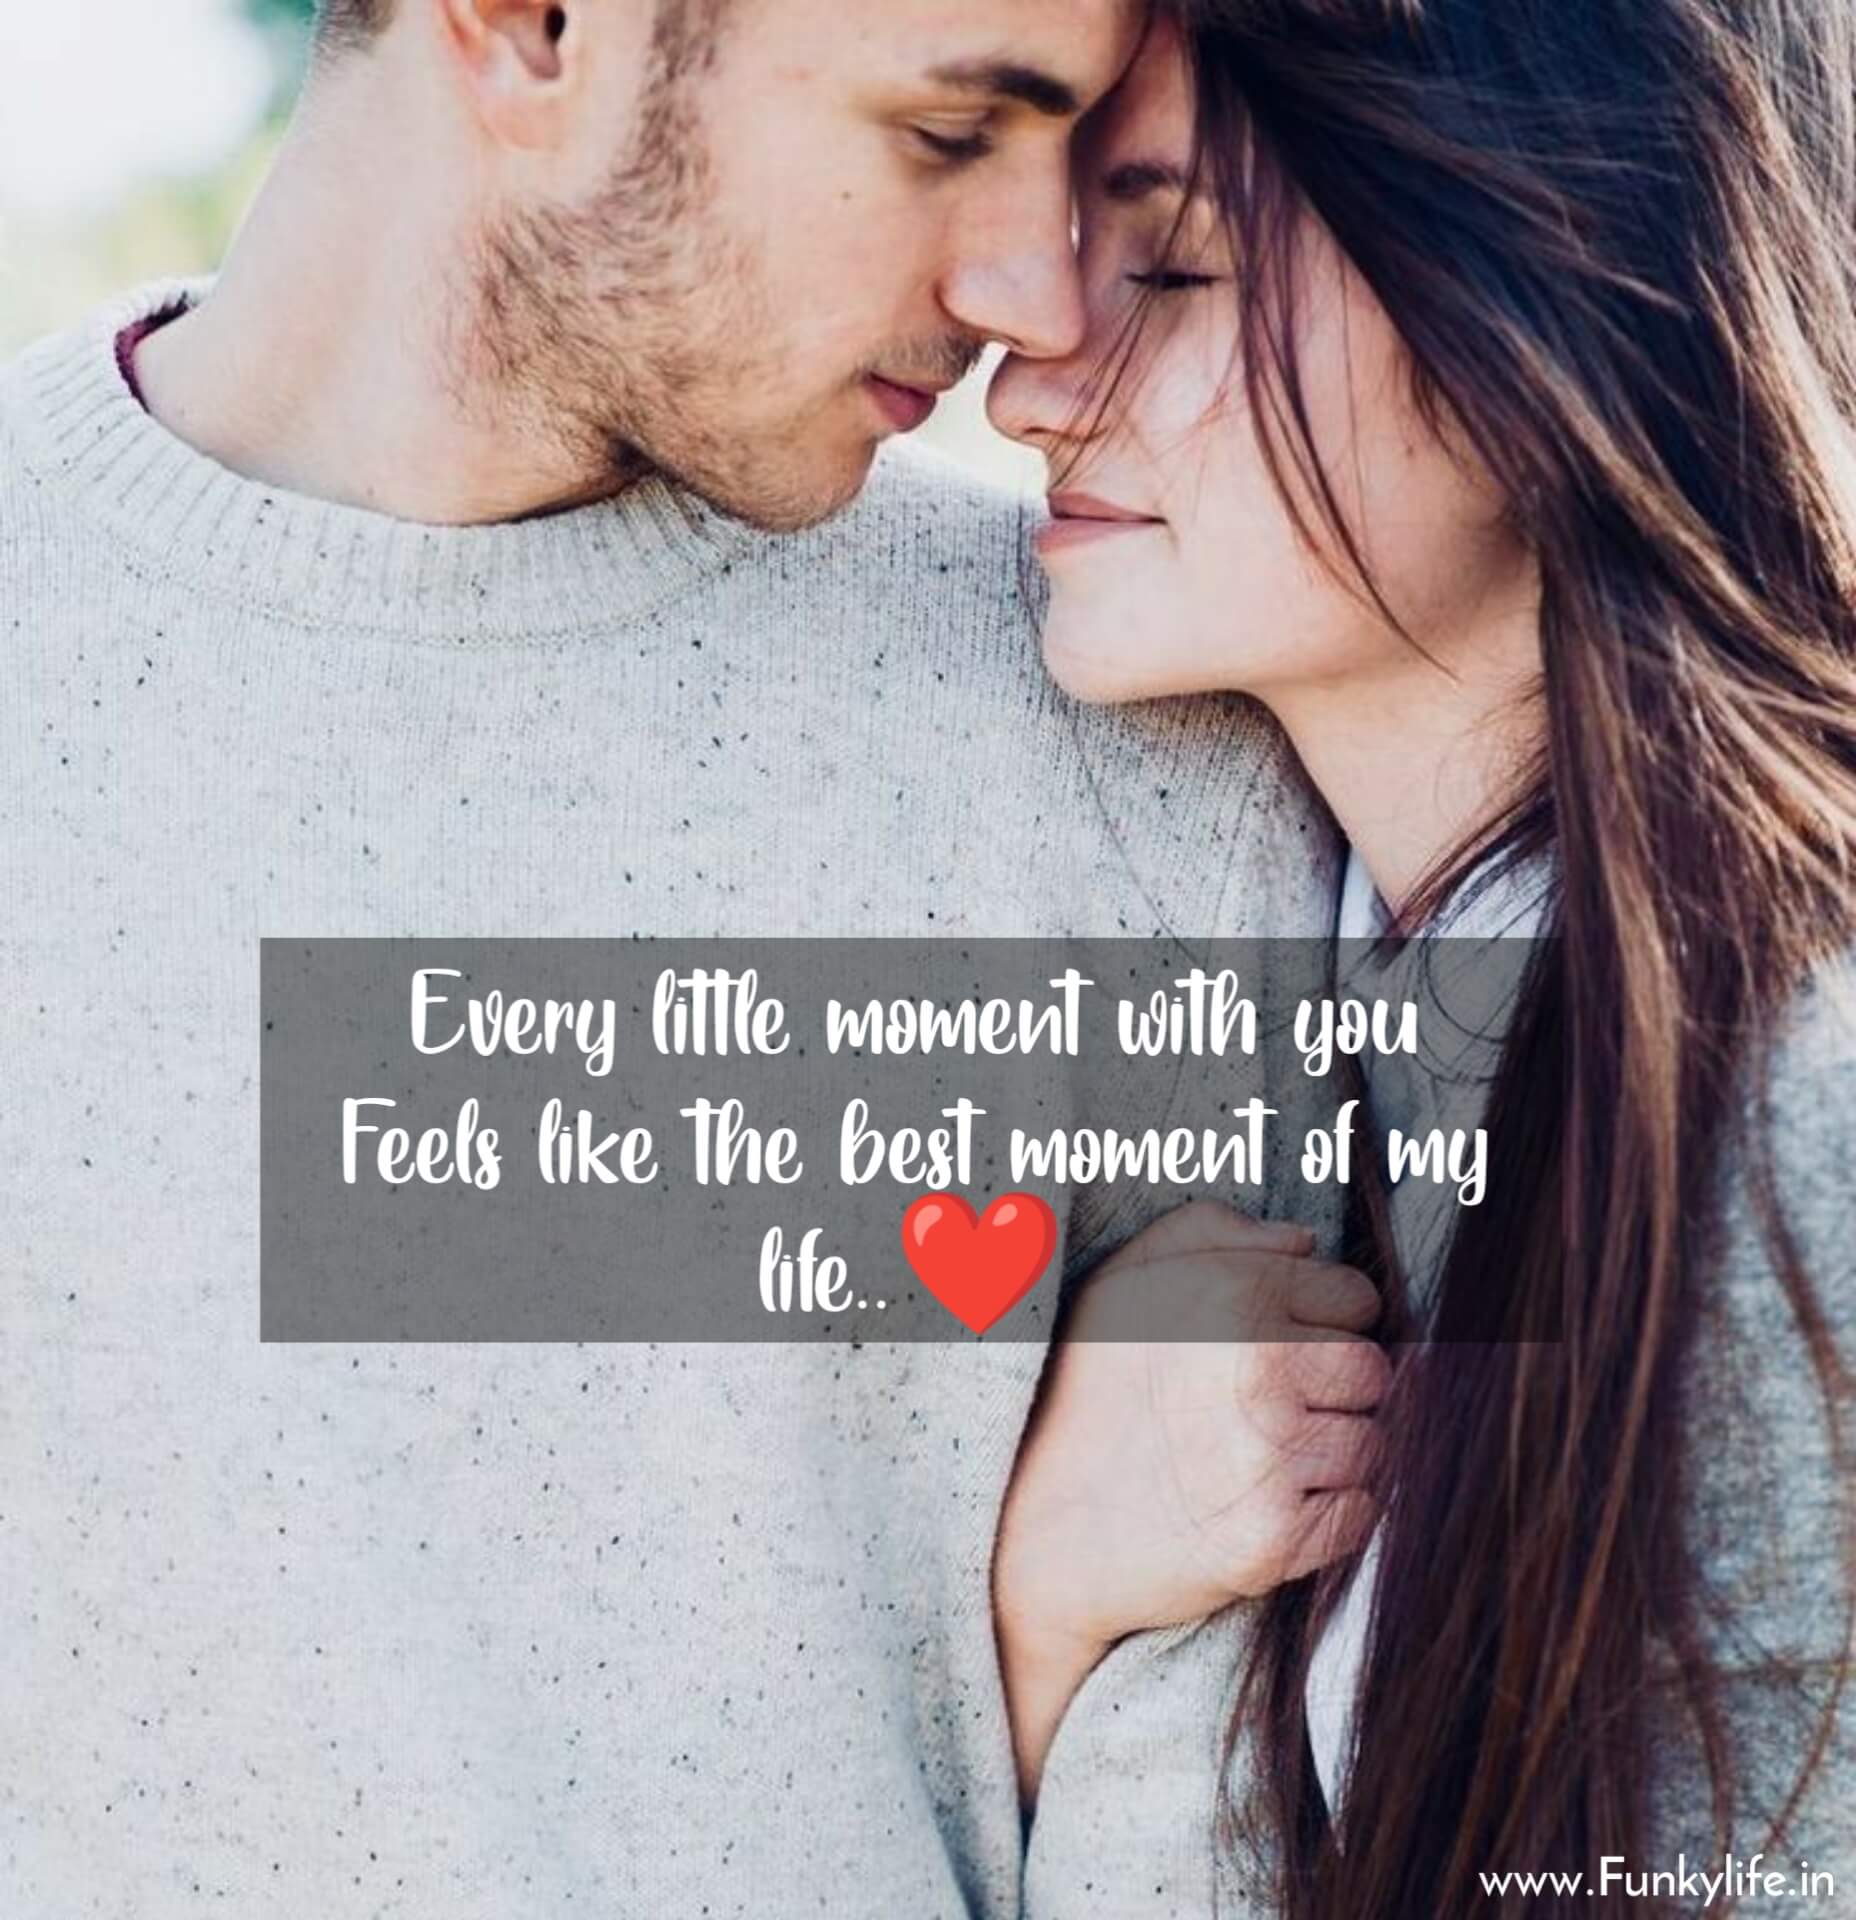 101 Most Romantic Love Quotes For Him & Her